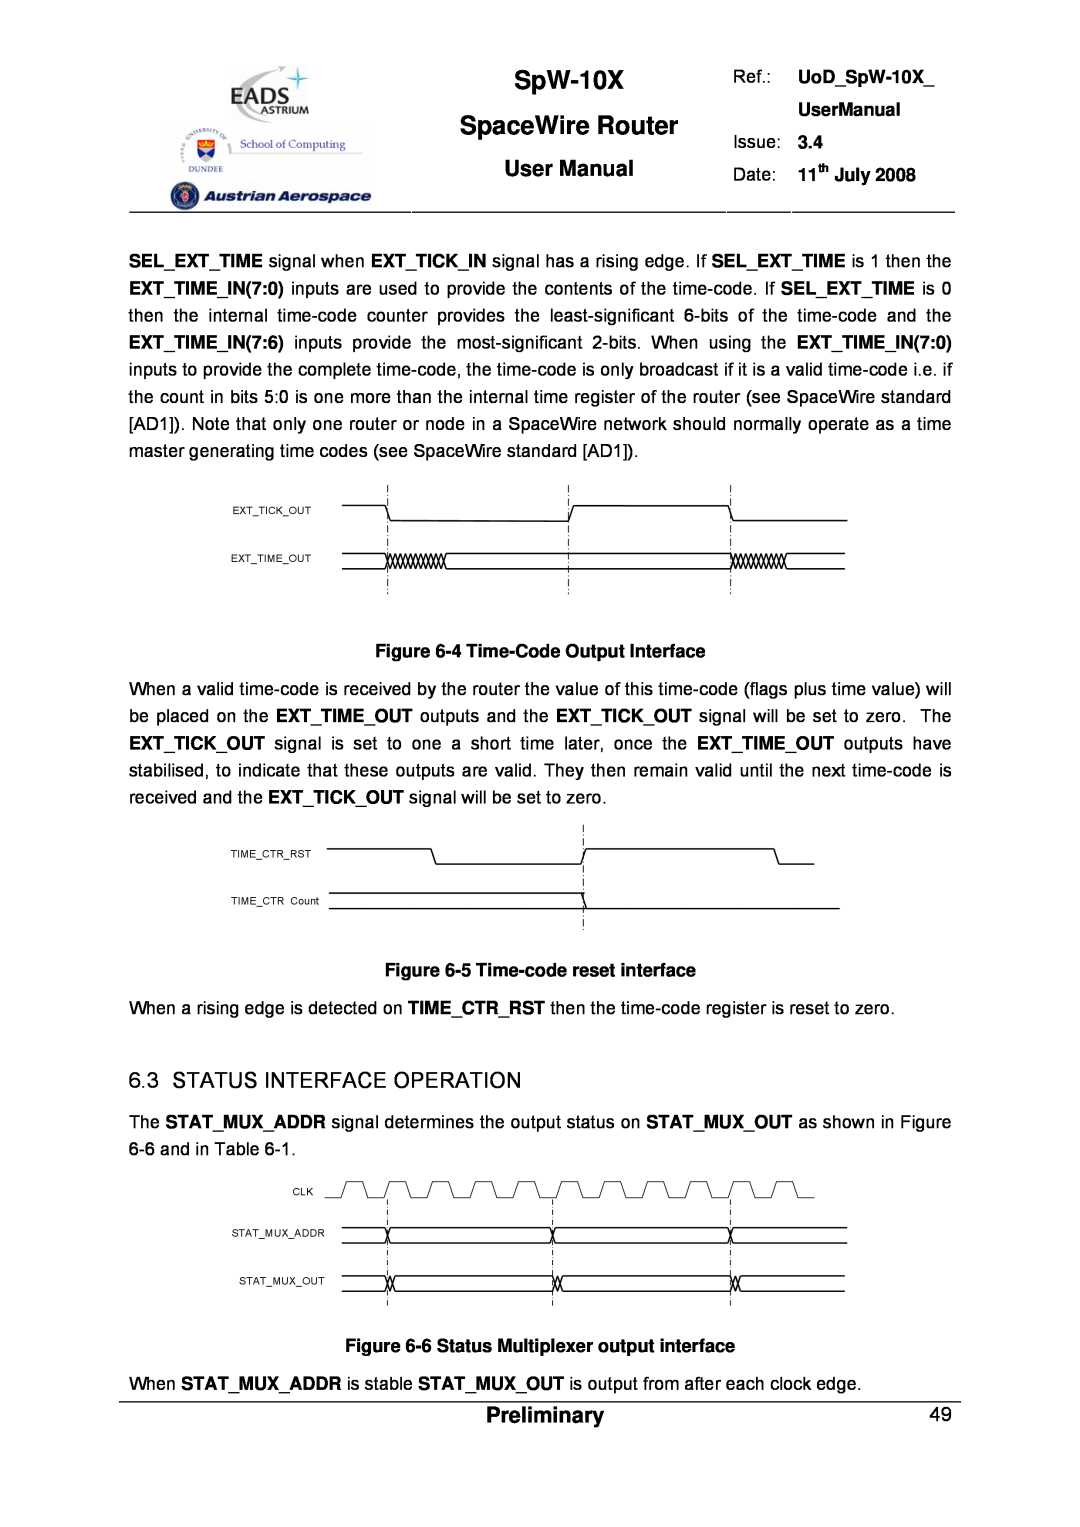 Atmel SpW-10X user manual Status Interface Operation, SpaceWire Router, User Manual, Preliminary 